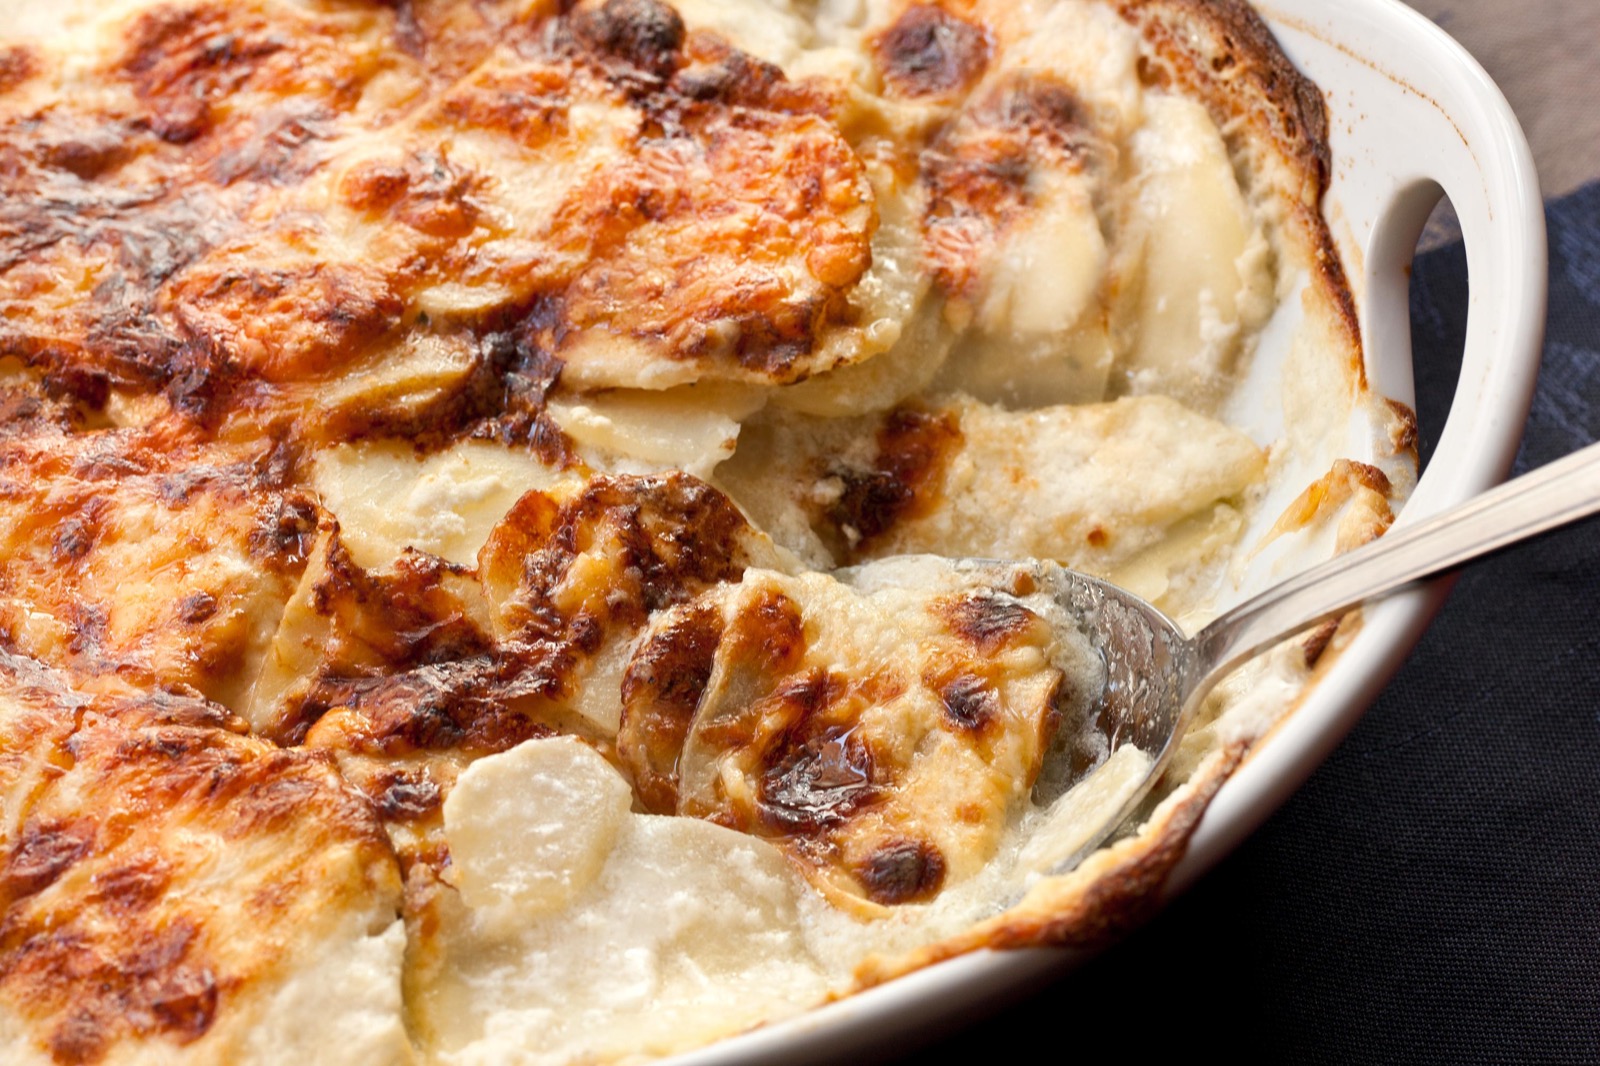 🎄 Can We Guess Which Decade of Life You’re in Based on Your Christmas Food Preferences? Scalloped potatoes